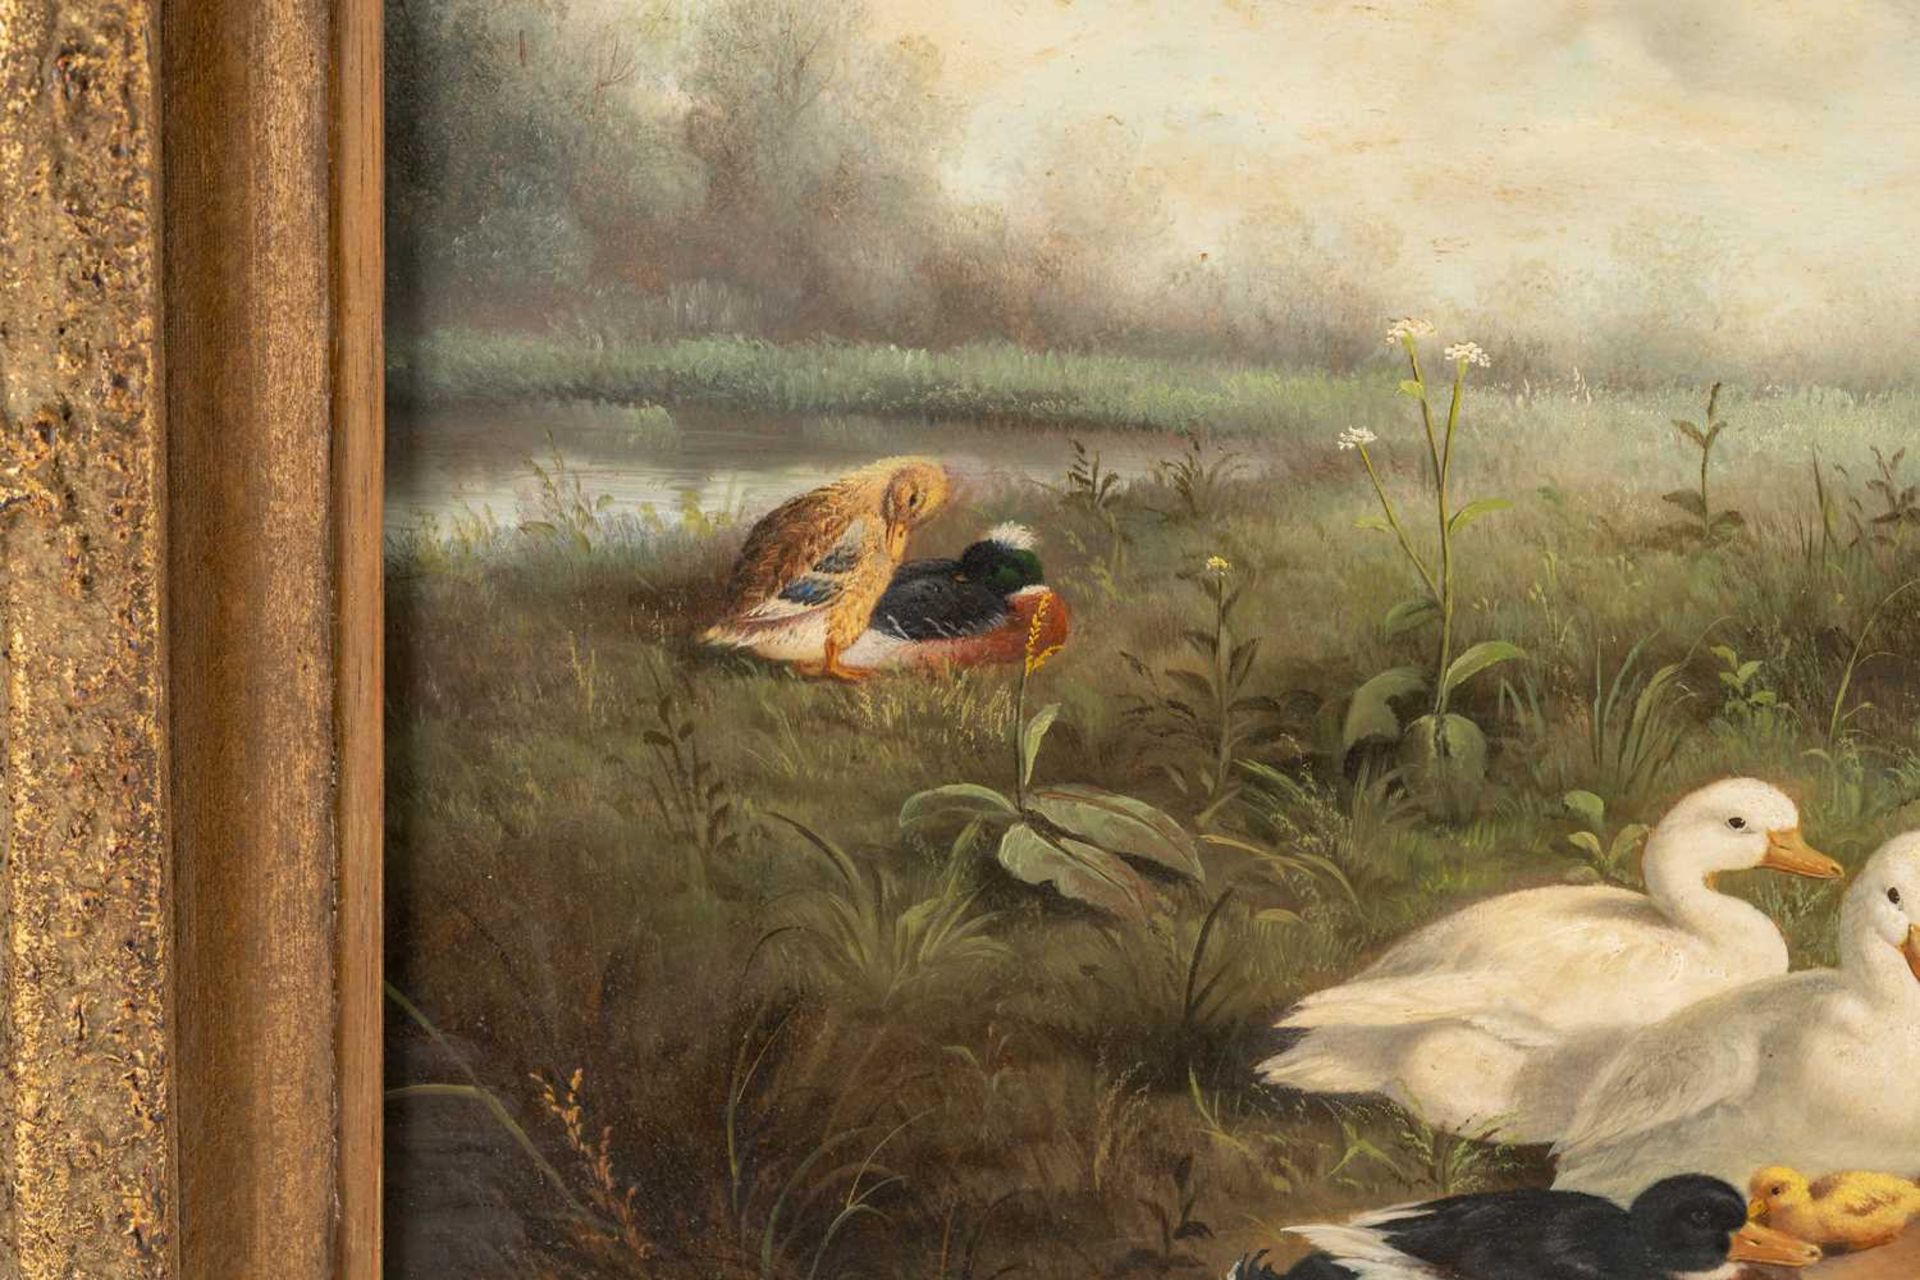 After Constant Artz (1870 - 1951), Ducks at a pond, bears signature C. Artz, oil on board, 38 x 48 - Image 4 of 10